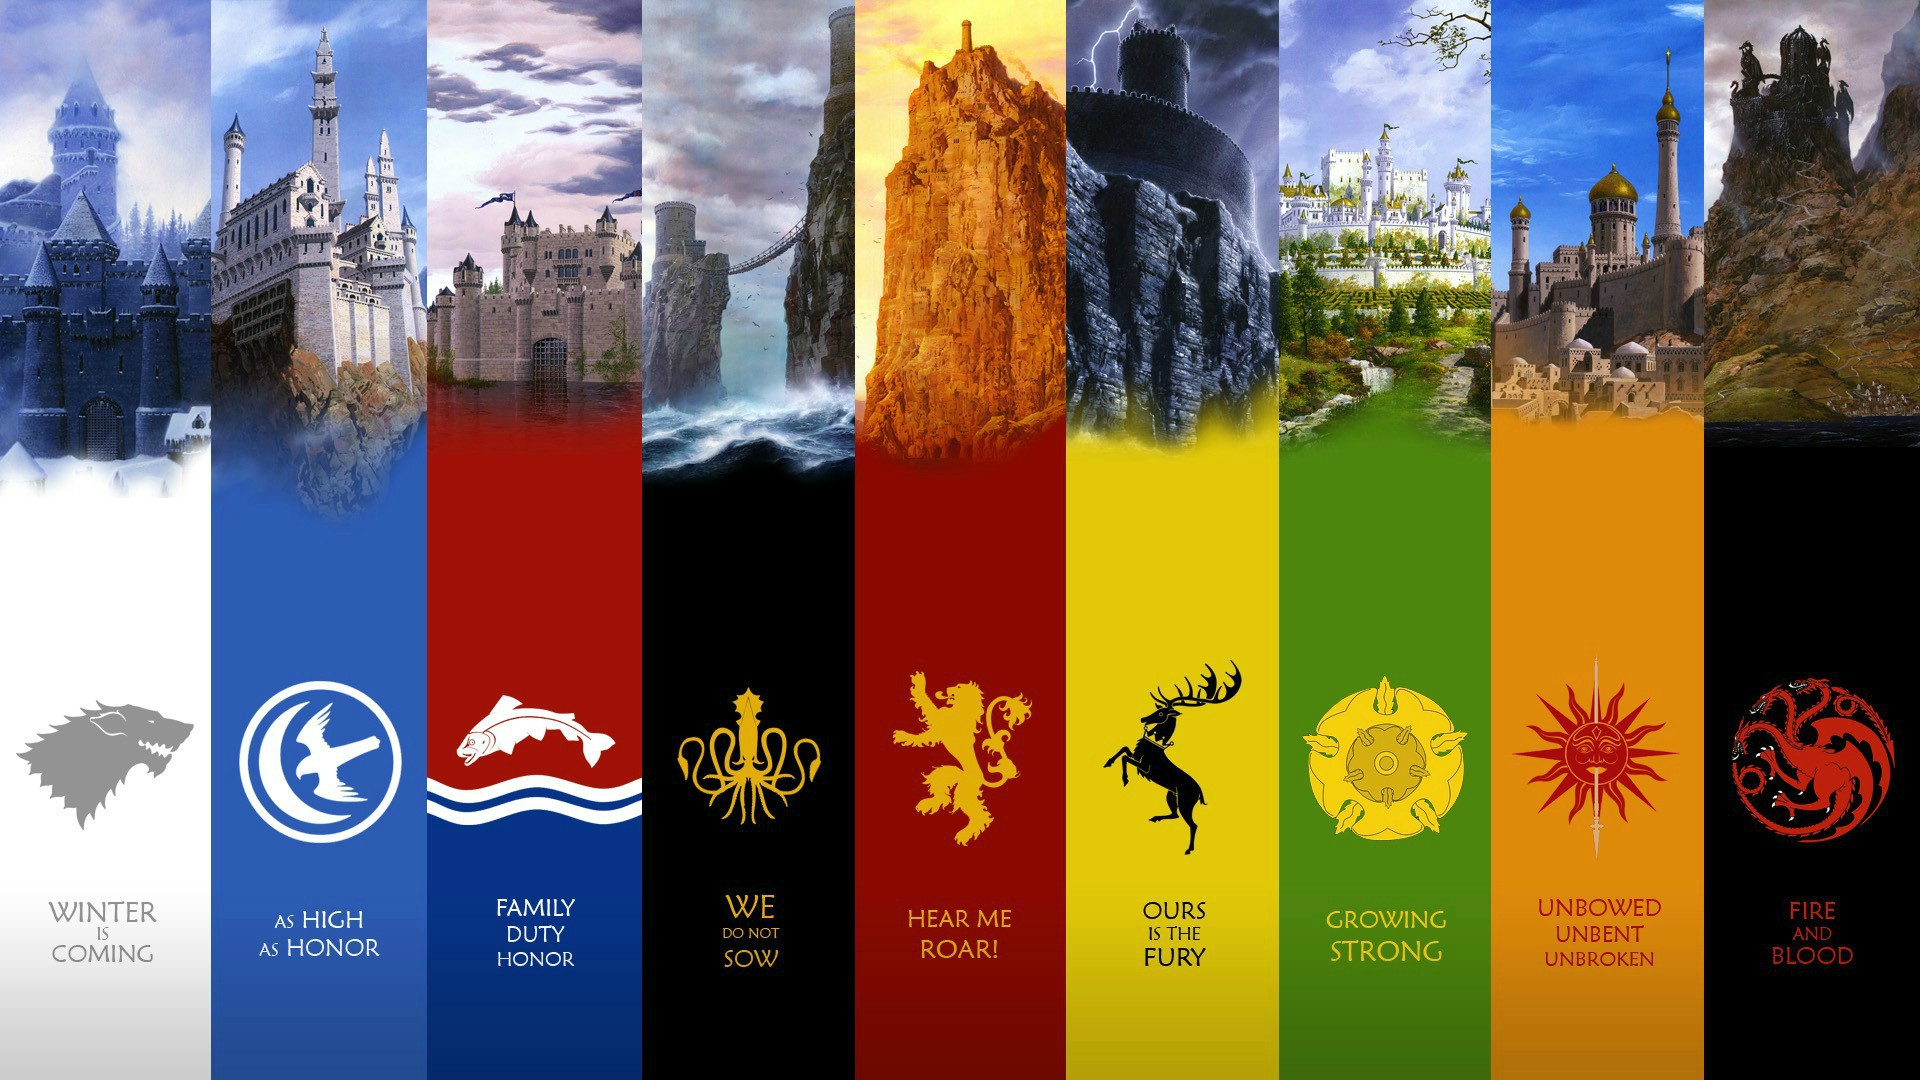 A Song Of Ice And Fire Puter Wallpaper Desktop